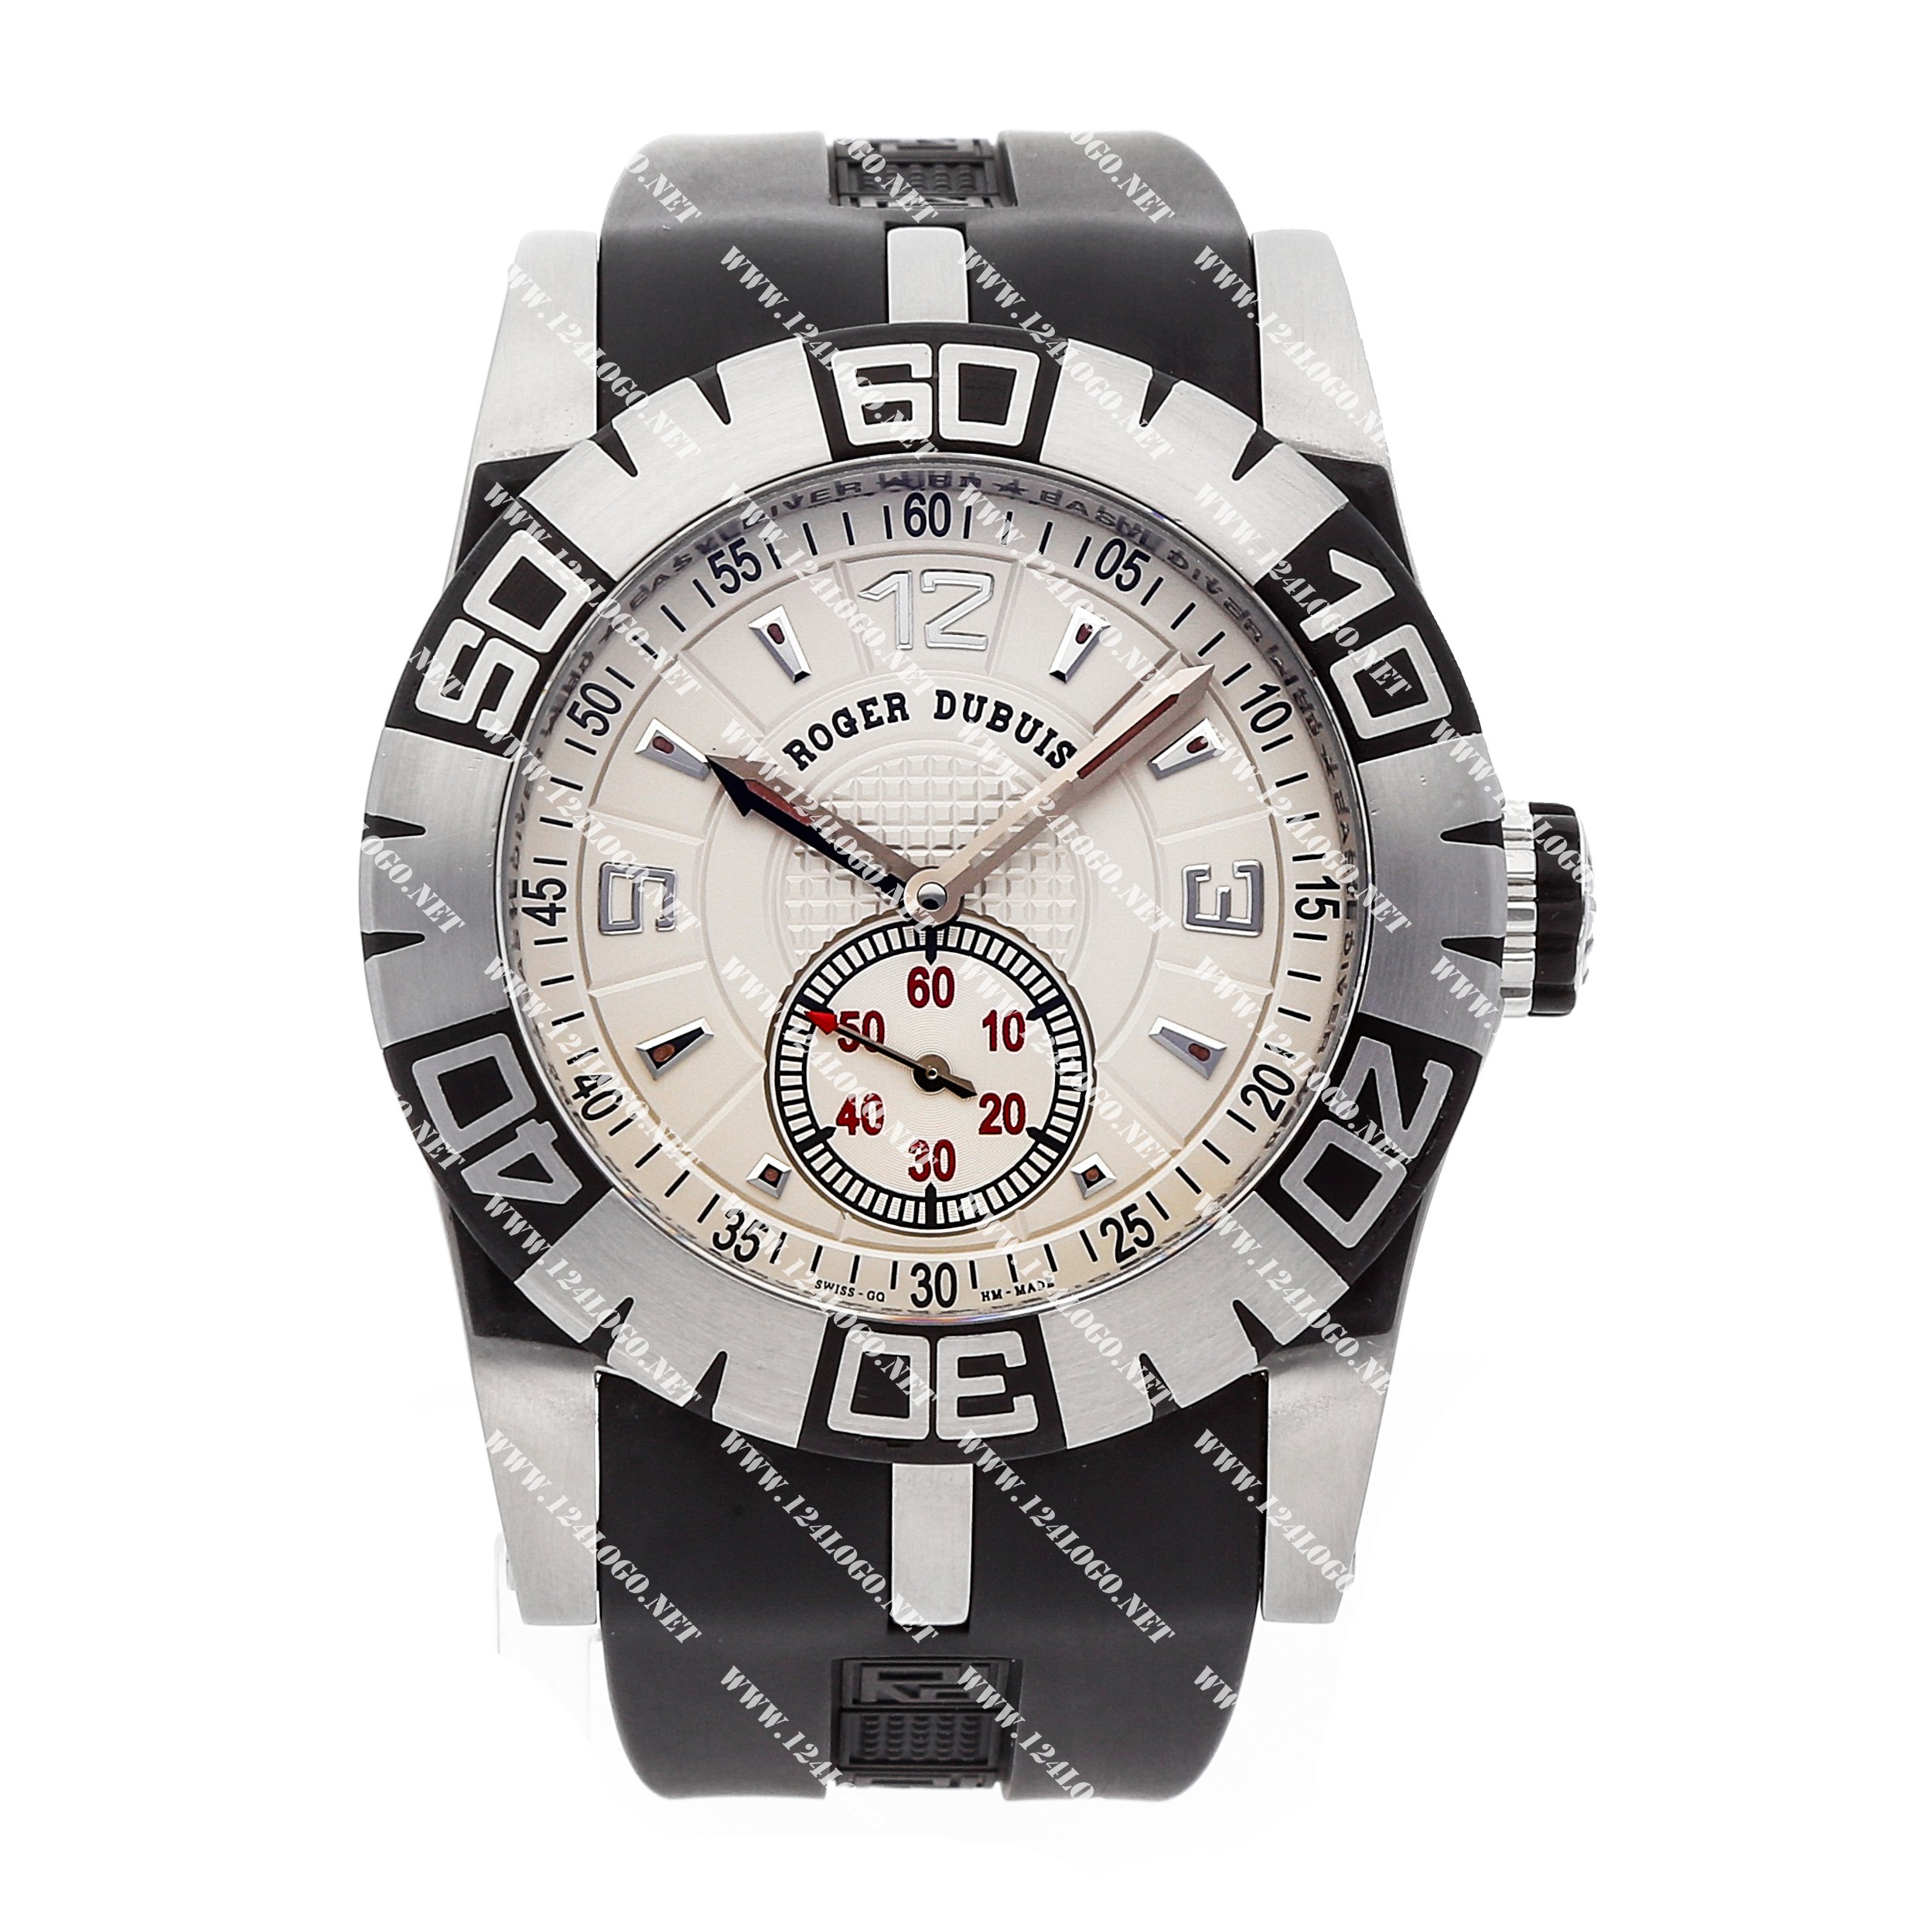 Replica Roger Dubuis Easy Diver 46mm-Steel SED46 14 91 00/03A10/A